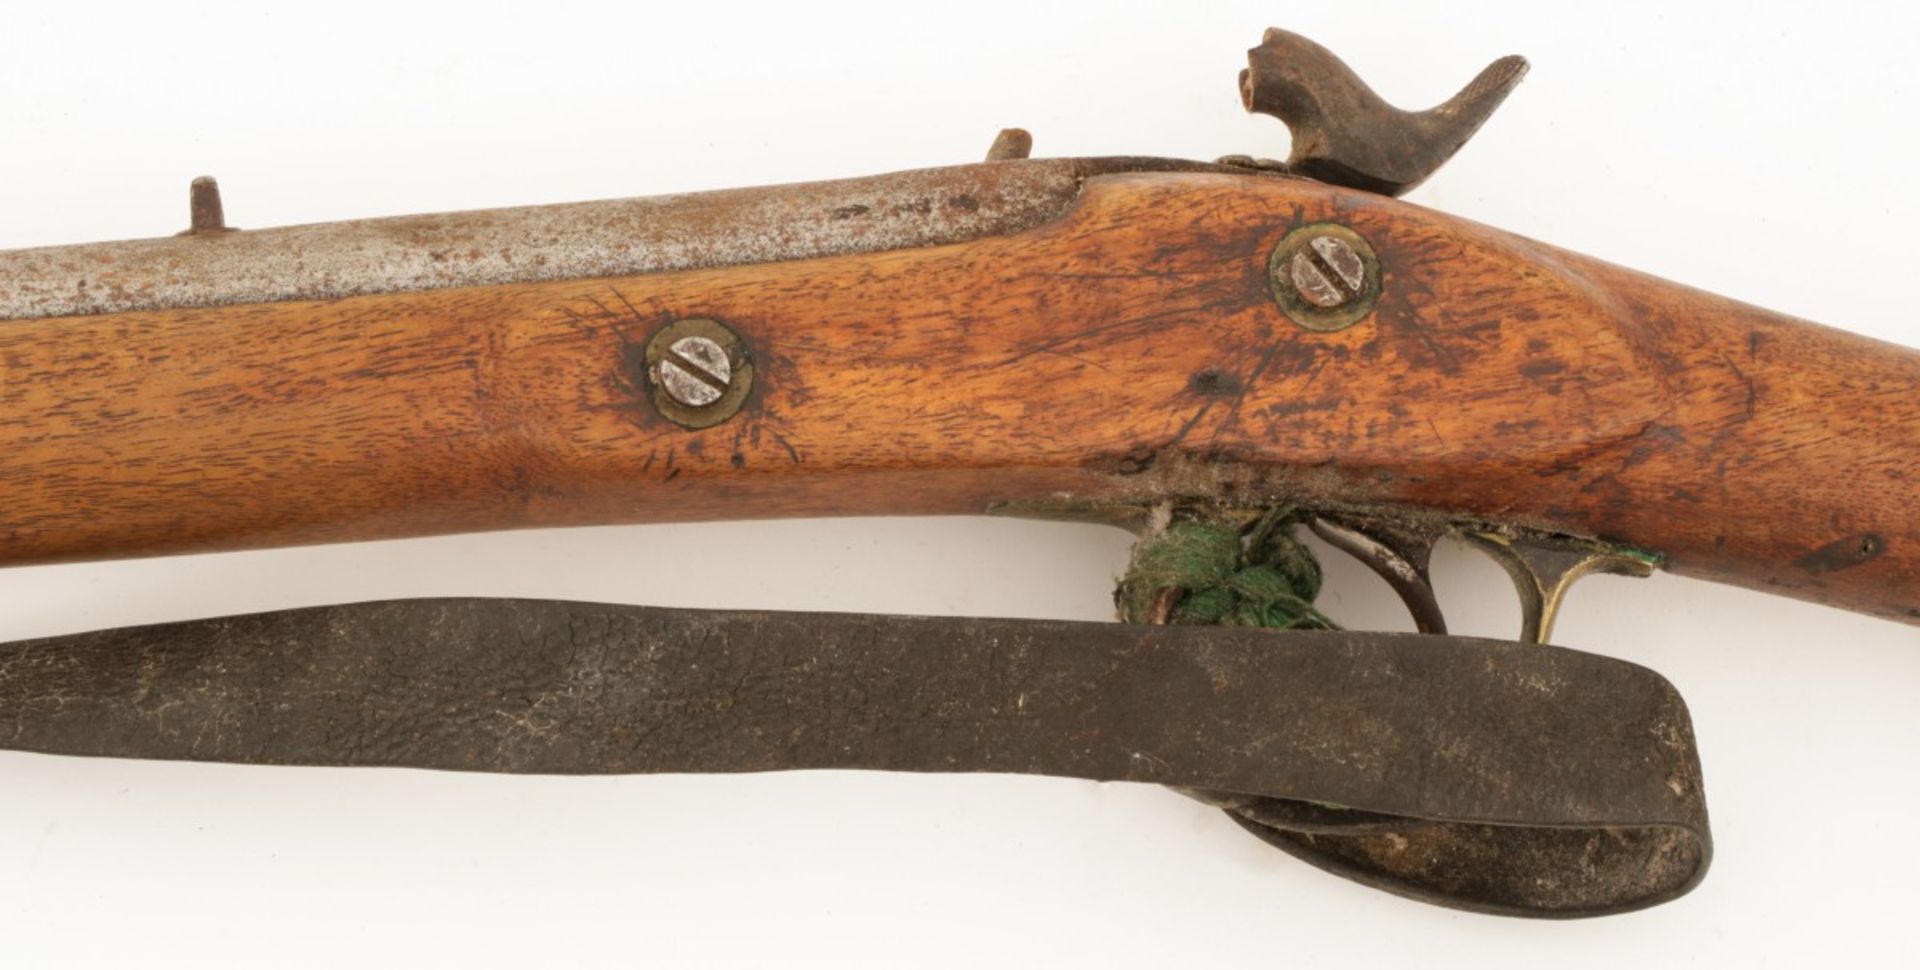 A Lee Enfield Tower percussion rifle, England, 1864. - Image 2 of 2